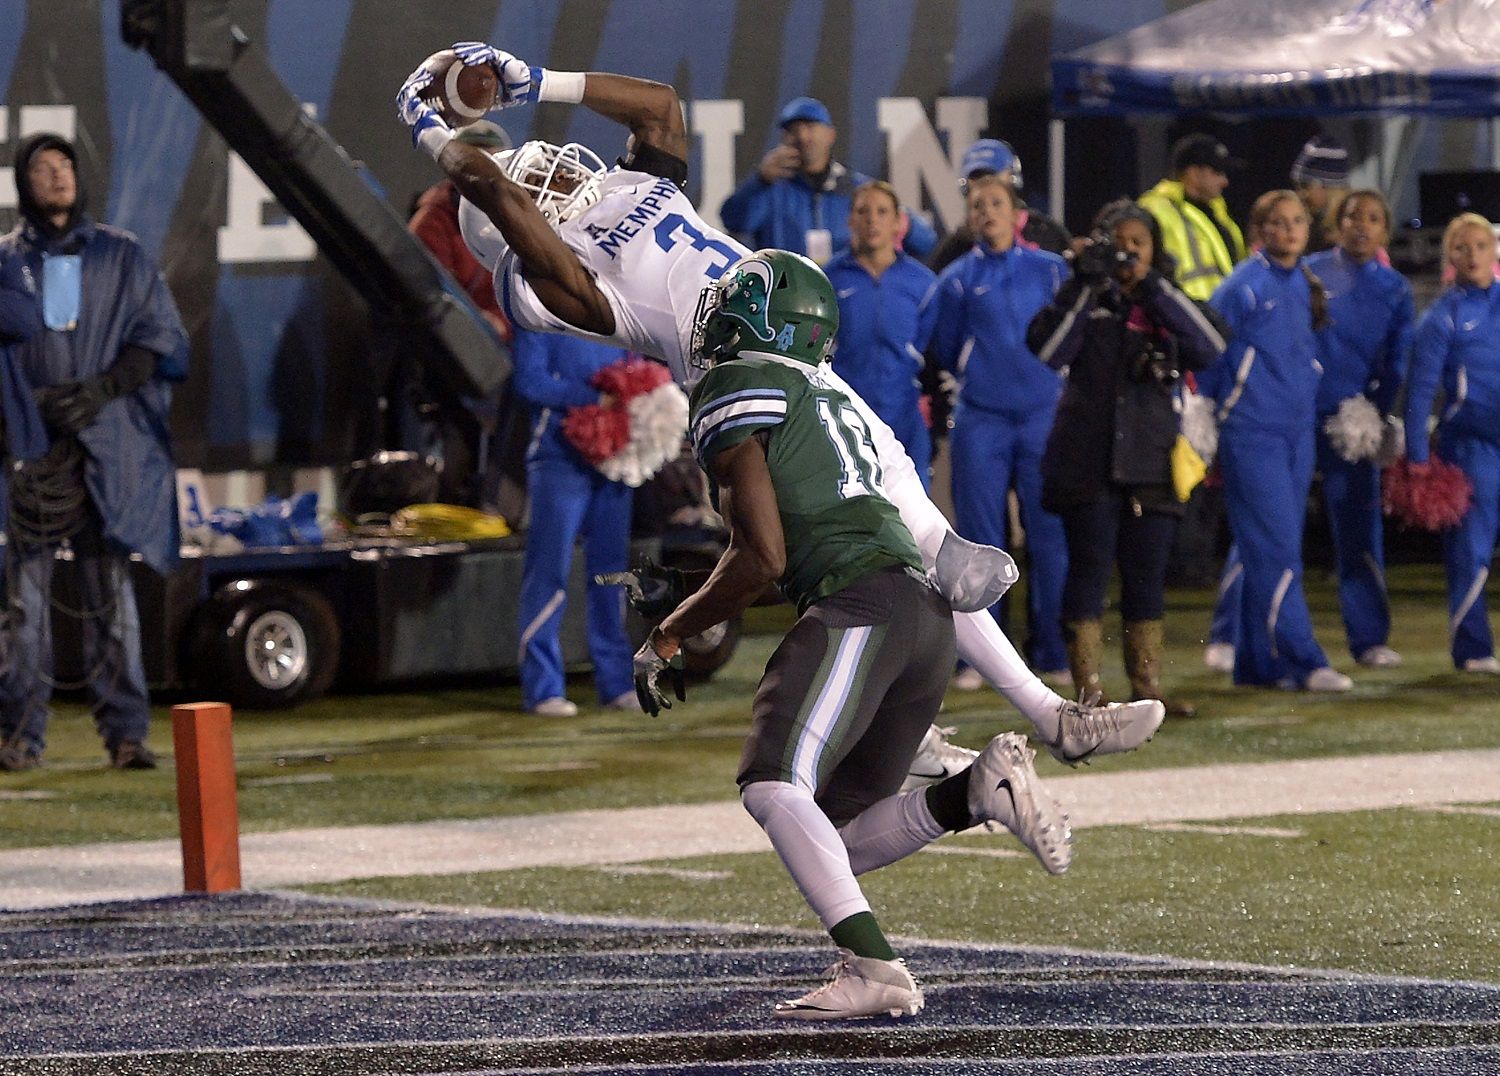 FILE - In this Oct. 27, 2017, file photo, Memphis wide receiver Anthony Miller (3) catches a pass against Tulane safety P.J. Hall (16) for a touchdown in the first half of an NCAA college football game in Memphis, Tenn. Miller is the conference’s leading receiver with 1,212 yards and 14 touchdowns.(AP Photo/Brandon Dill, File)